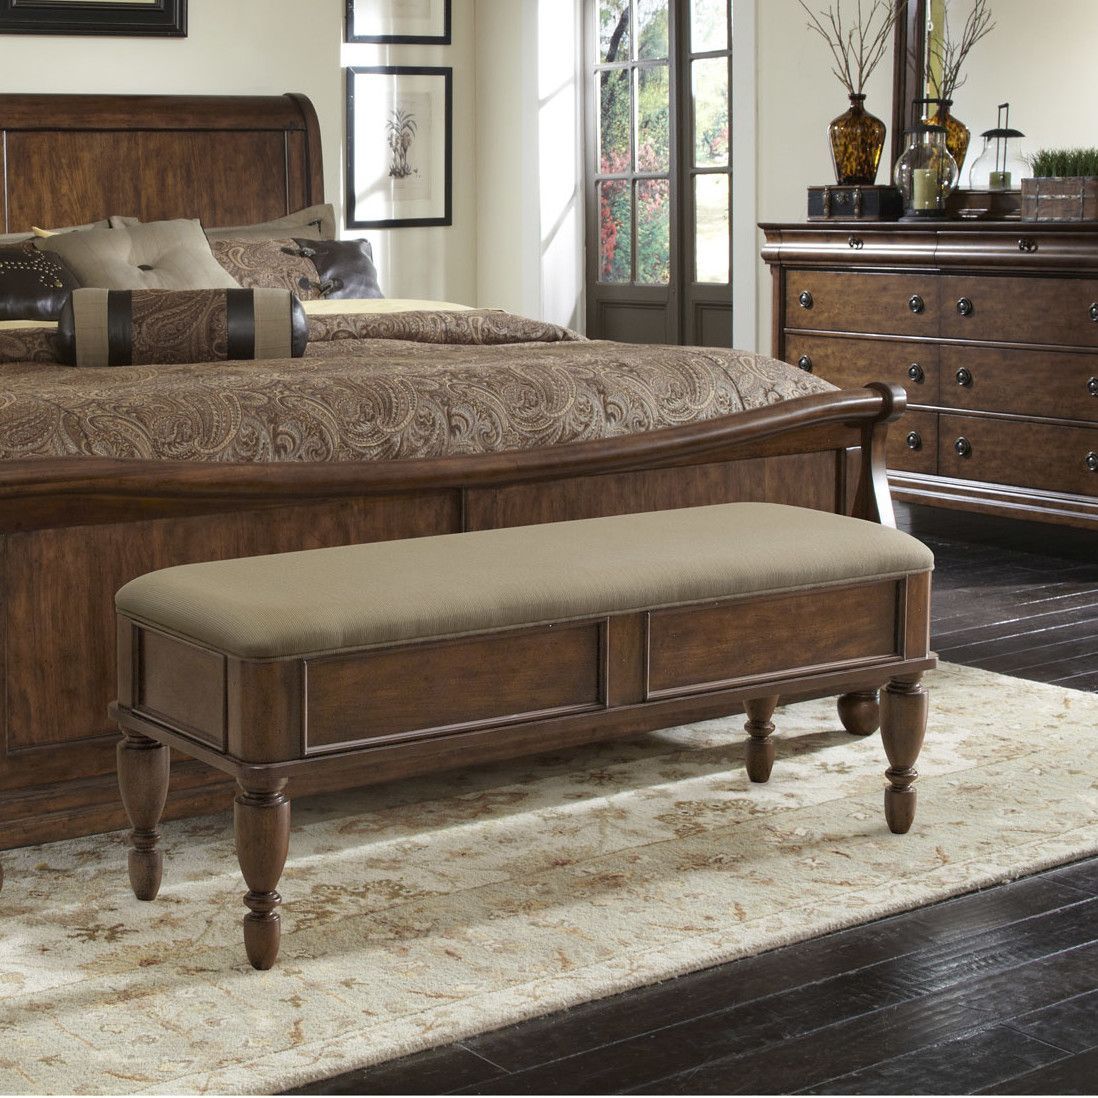 All About The Bedroom Upholstered Bench: Styles And Benefits